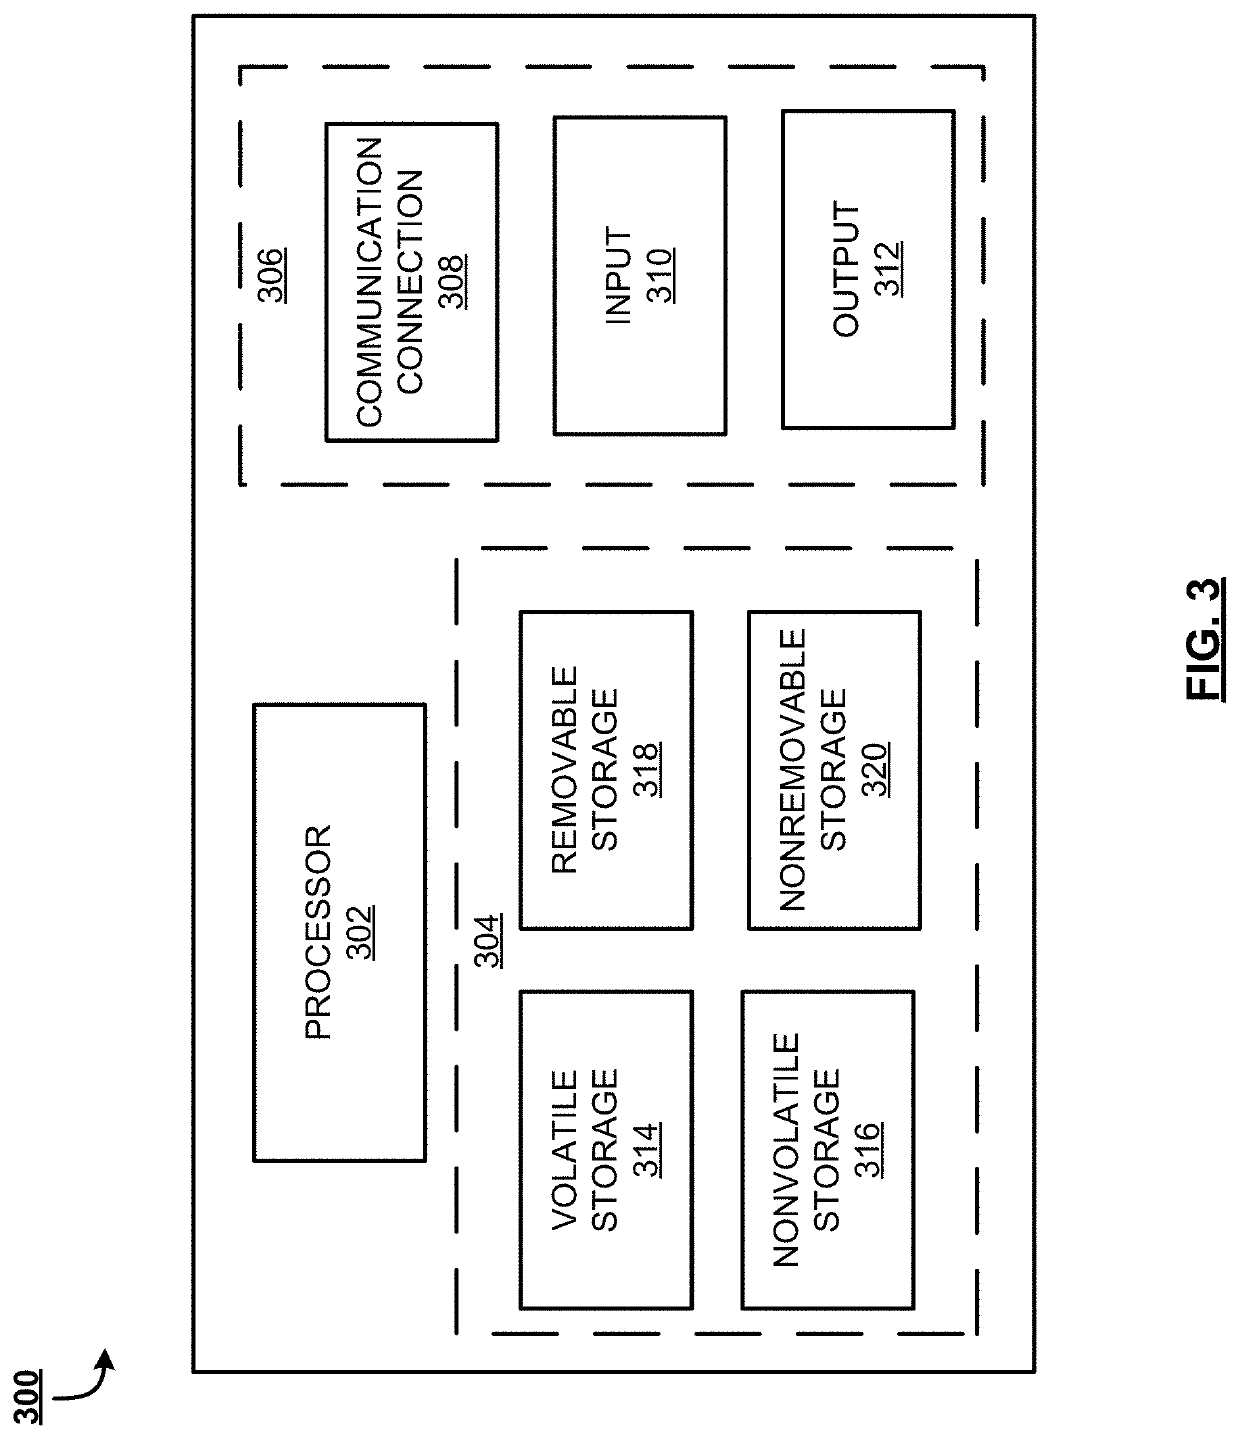 Systems and methods for anomaly detection and survival analysis for physical assets